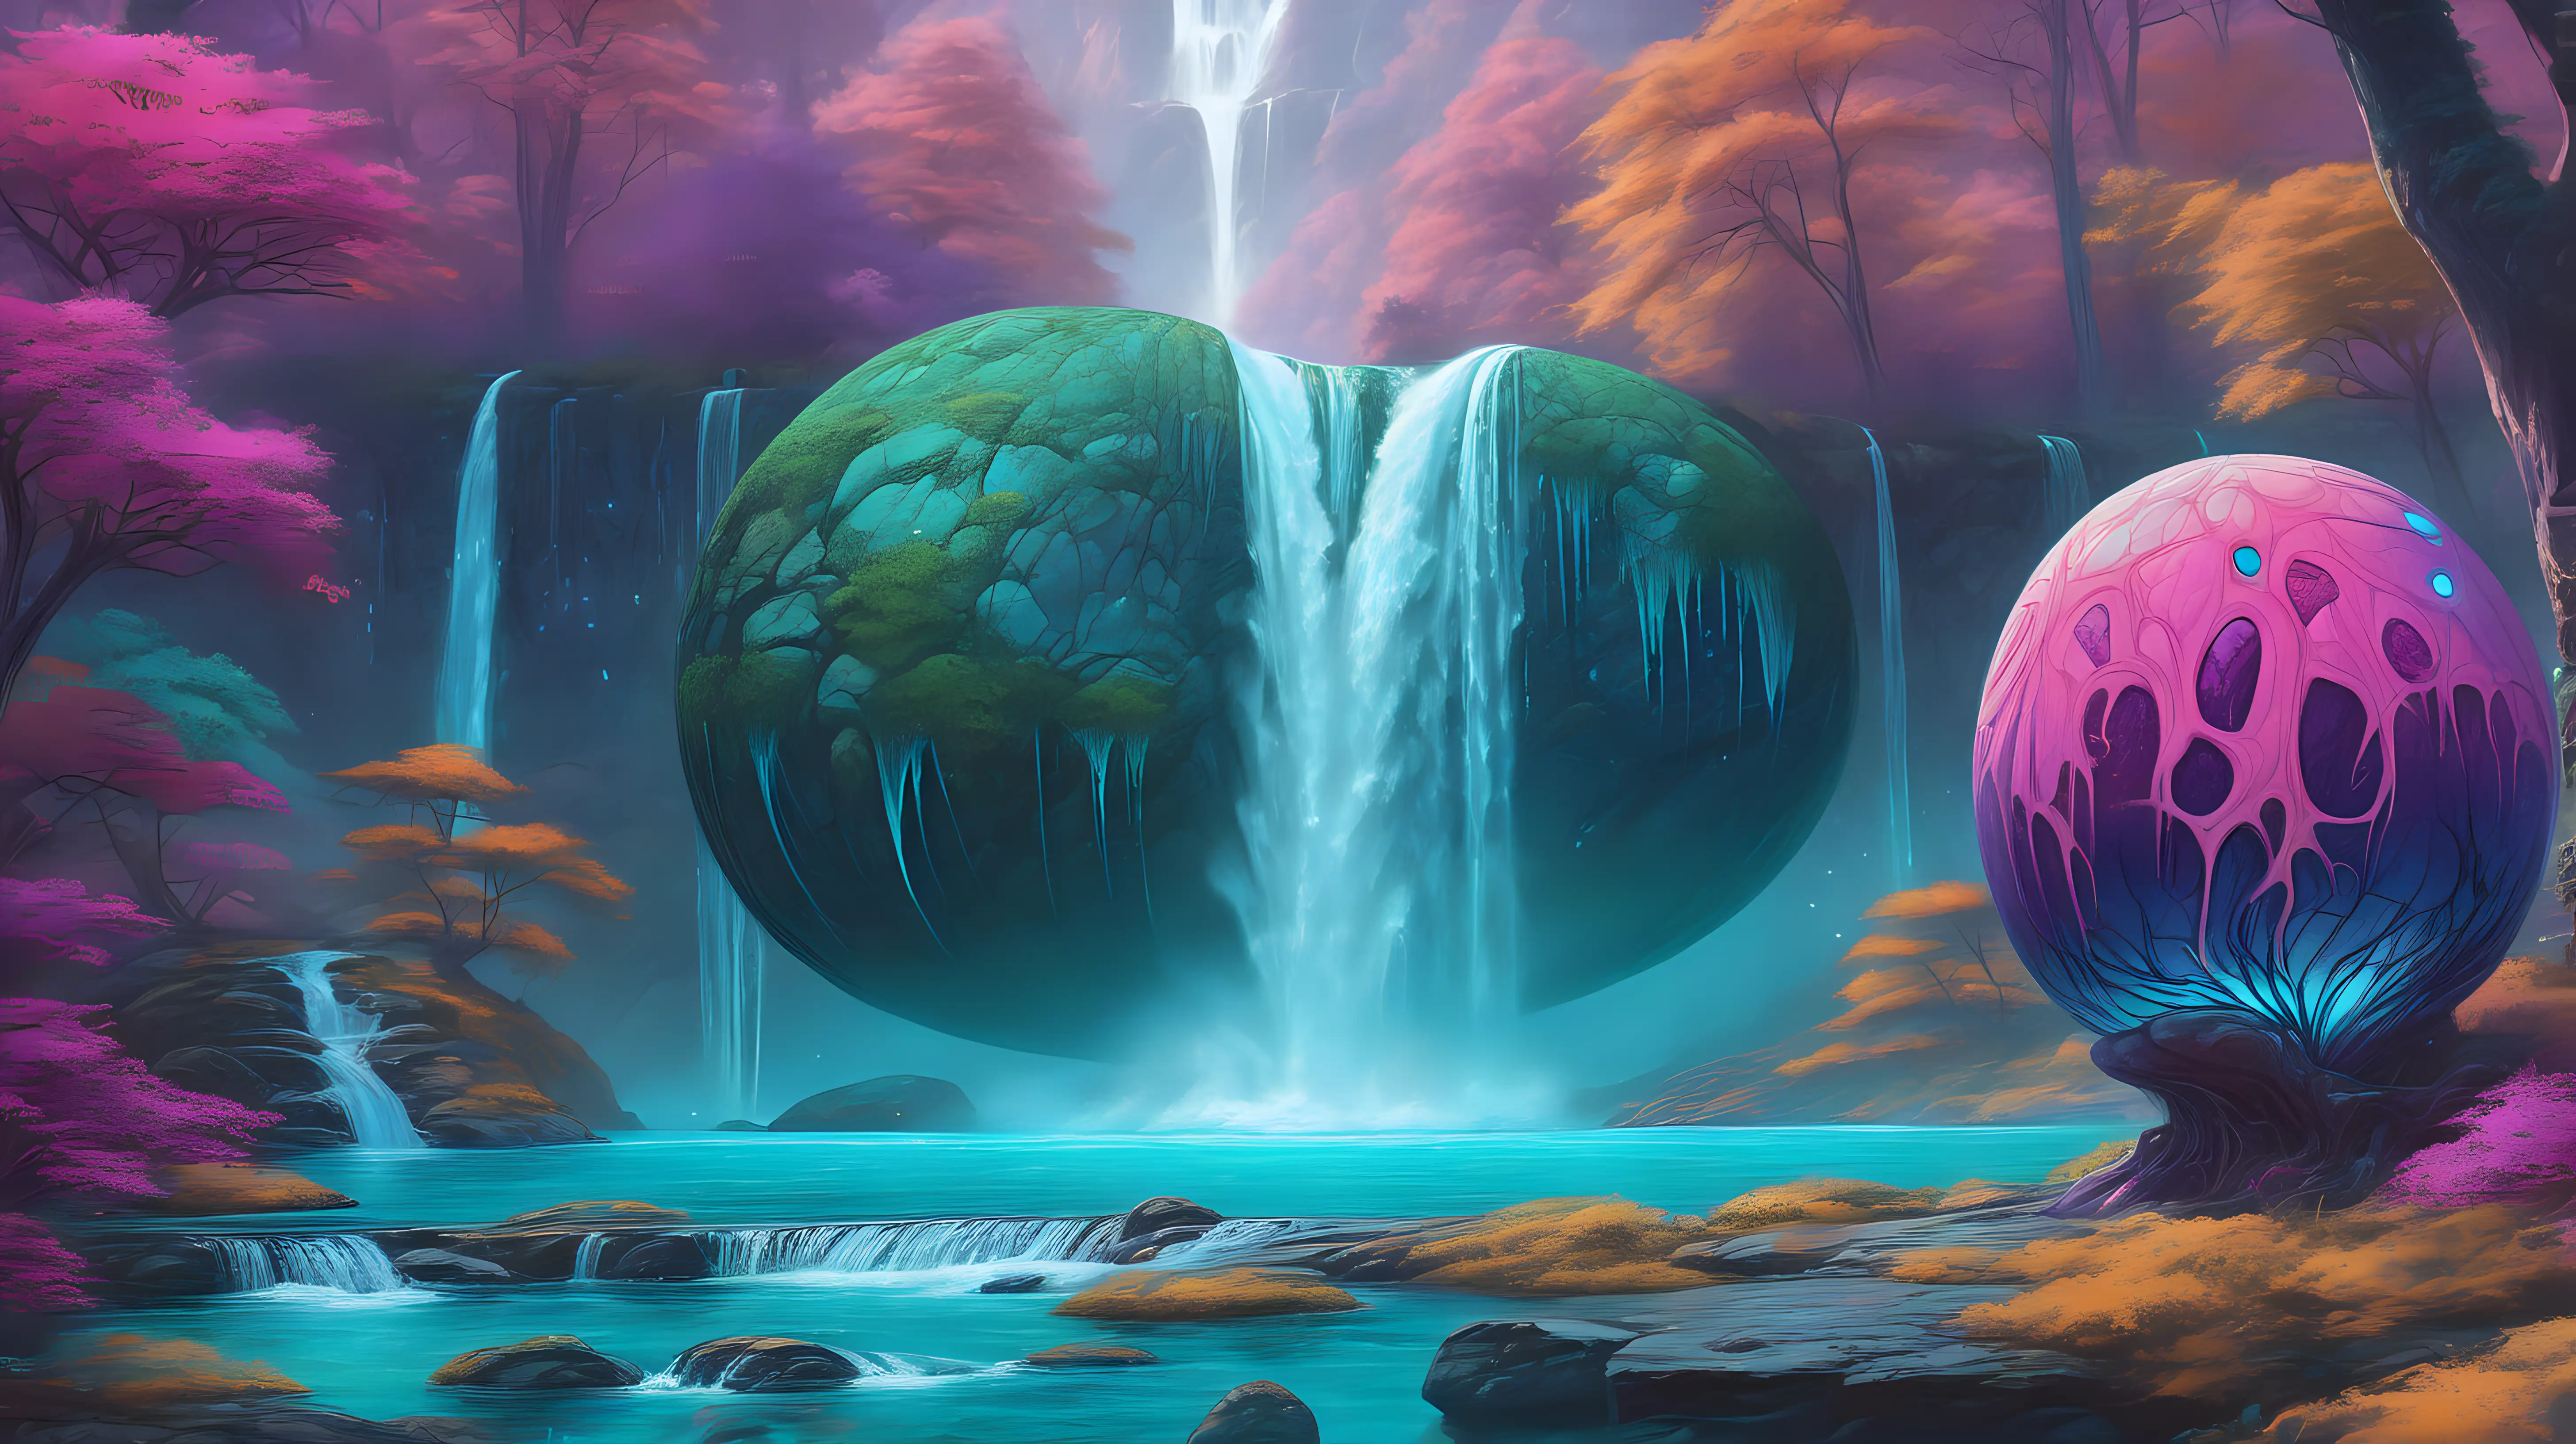 Enchanted Dragon Egg Nestled Amidst Turquoise Forest by Magical Waterfall